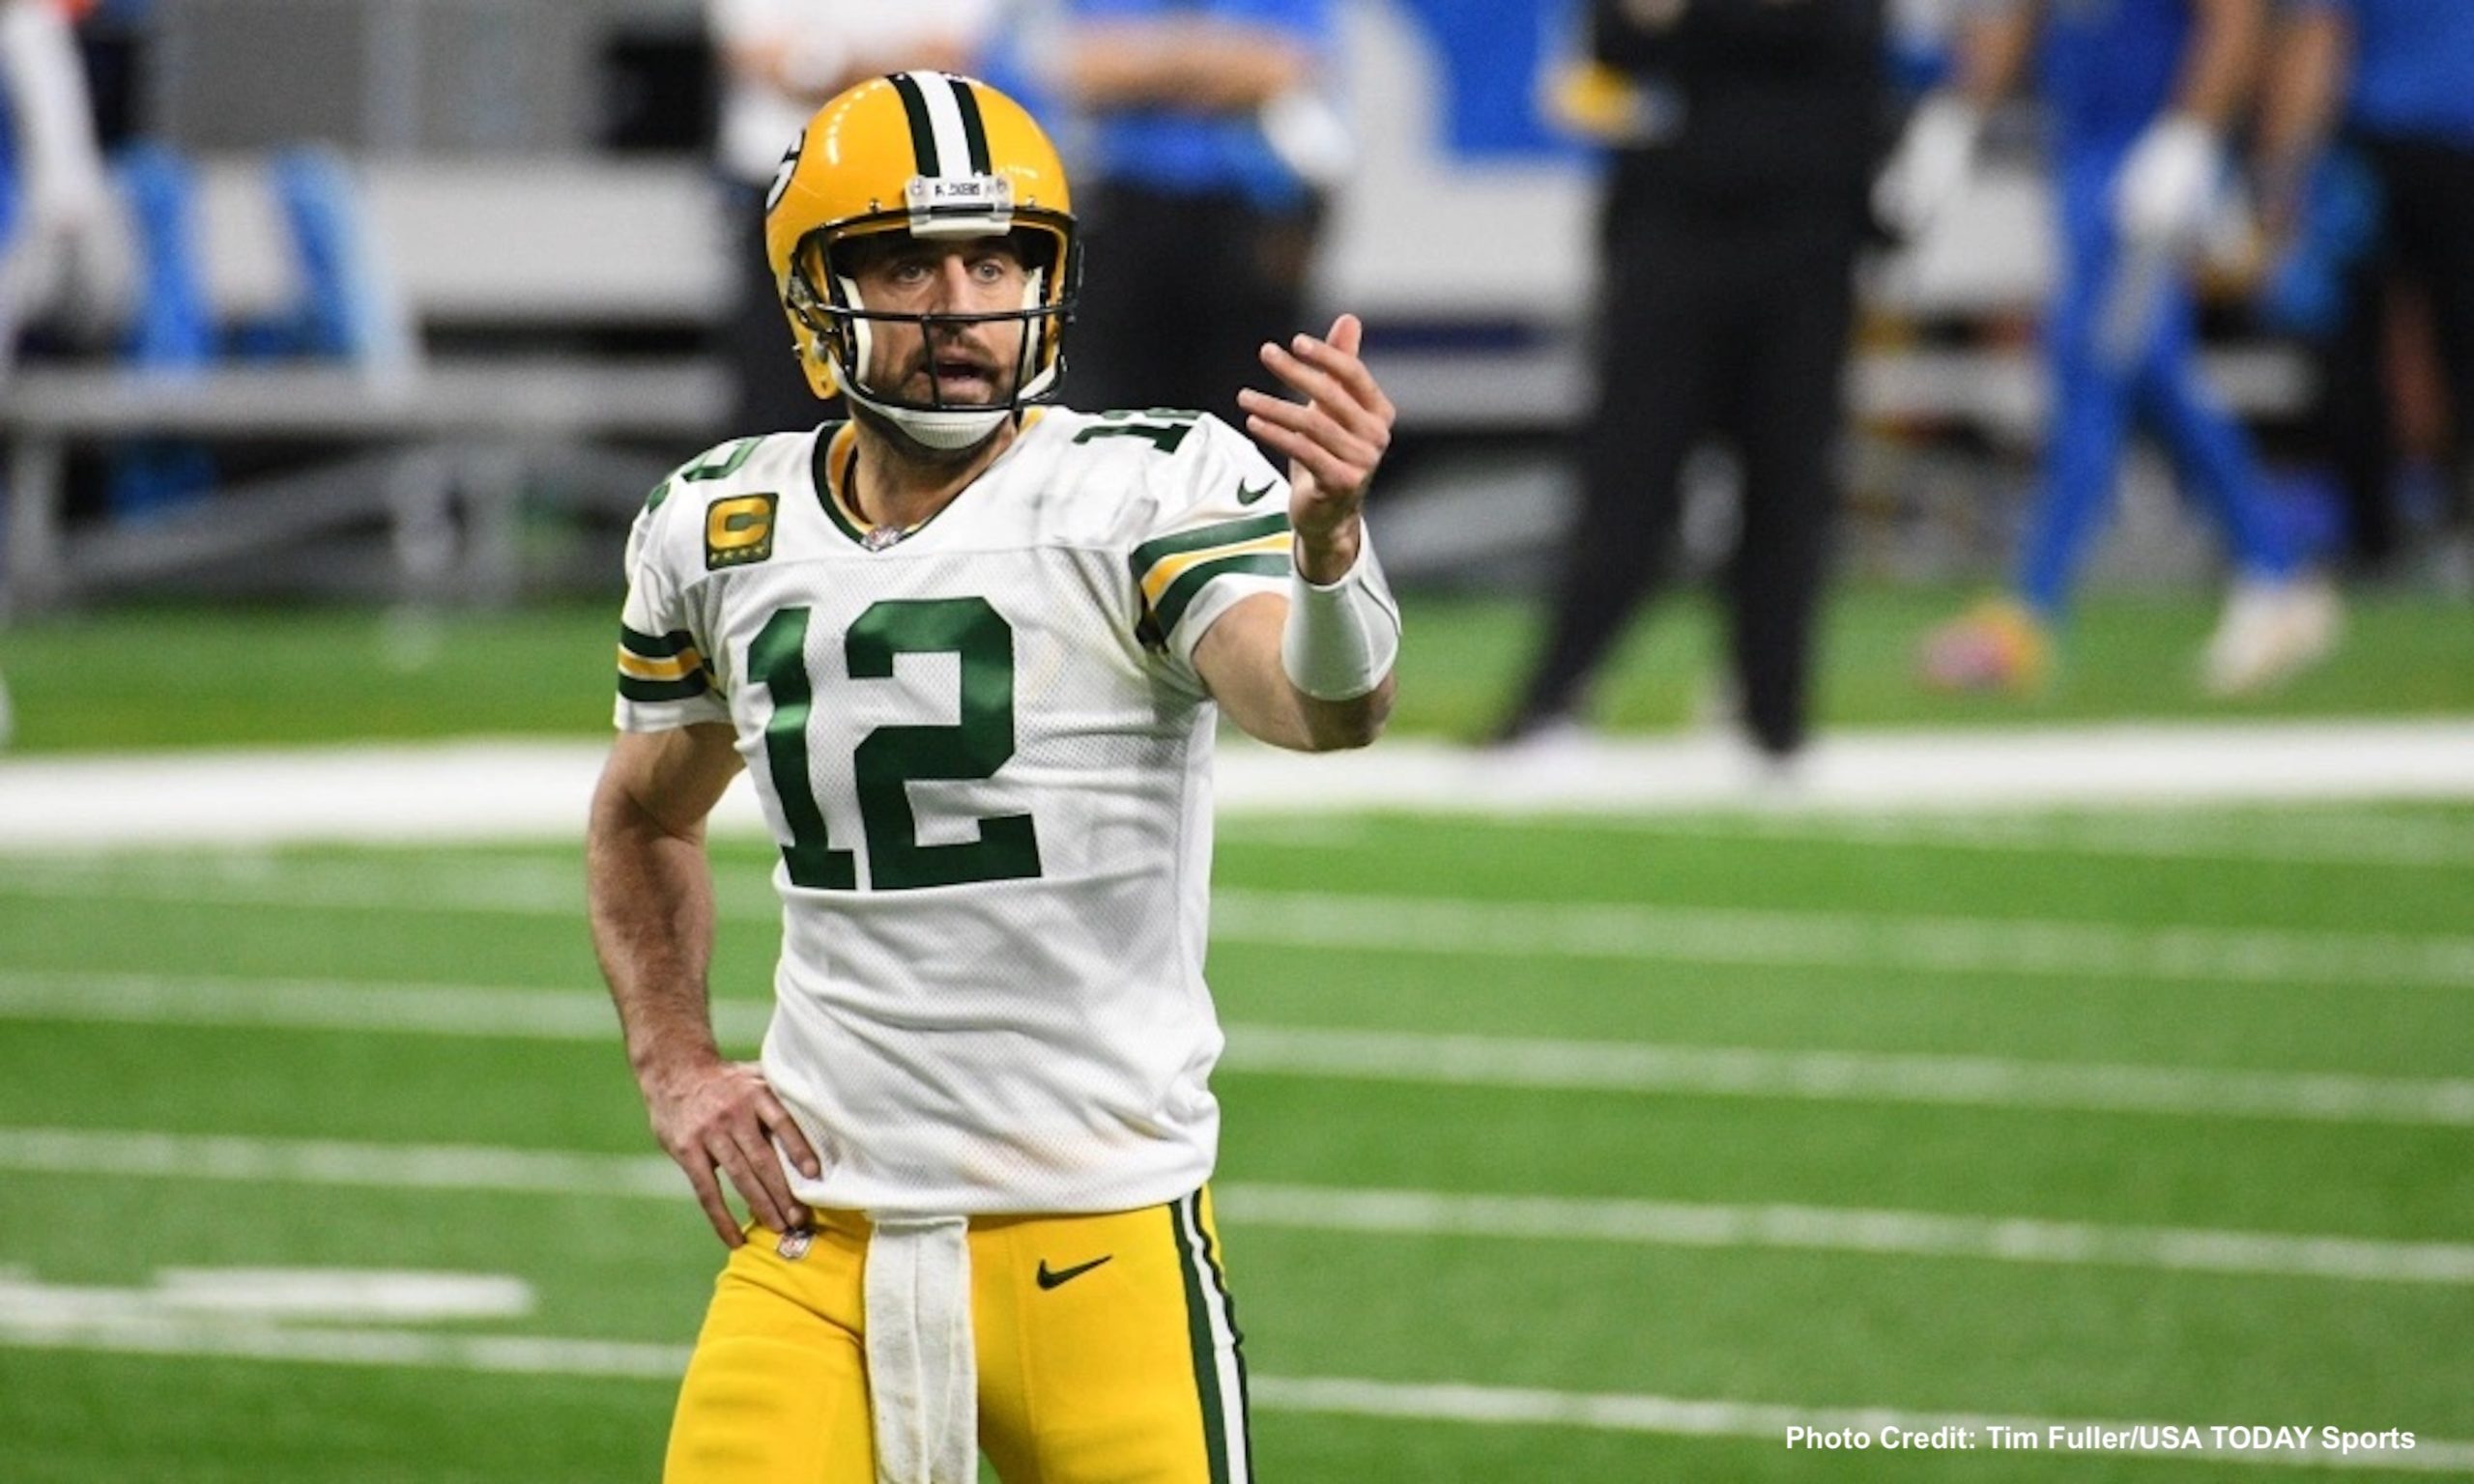 Aaron Rodgers dropped a bombshell on his team that he didn't want to return and both sides don't appear to be budging on their stance.